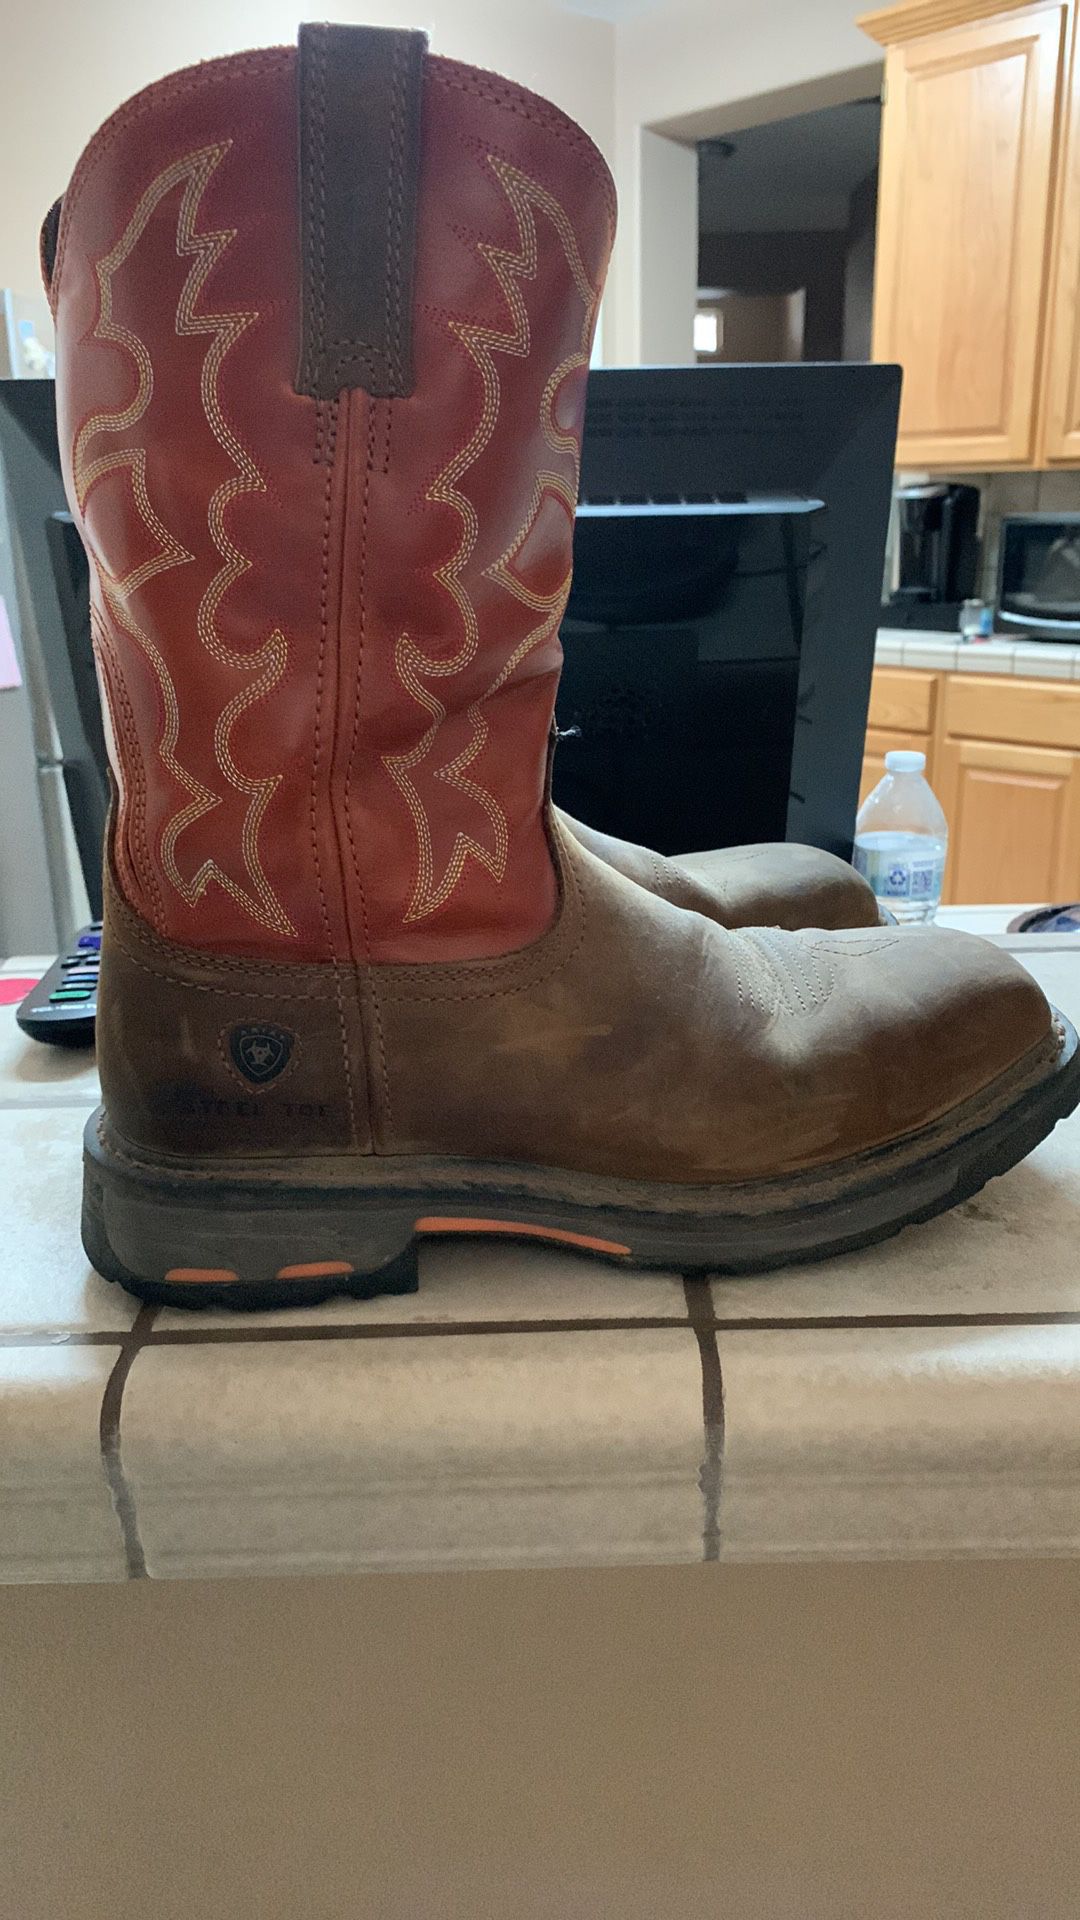 Work Boots 8 1/2 Used Once $150